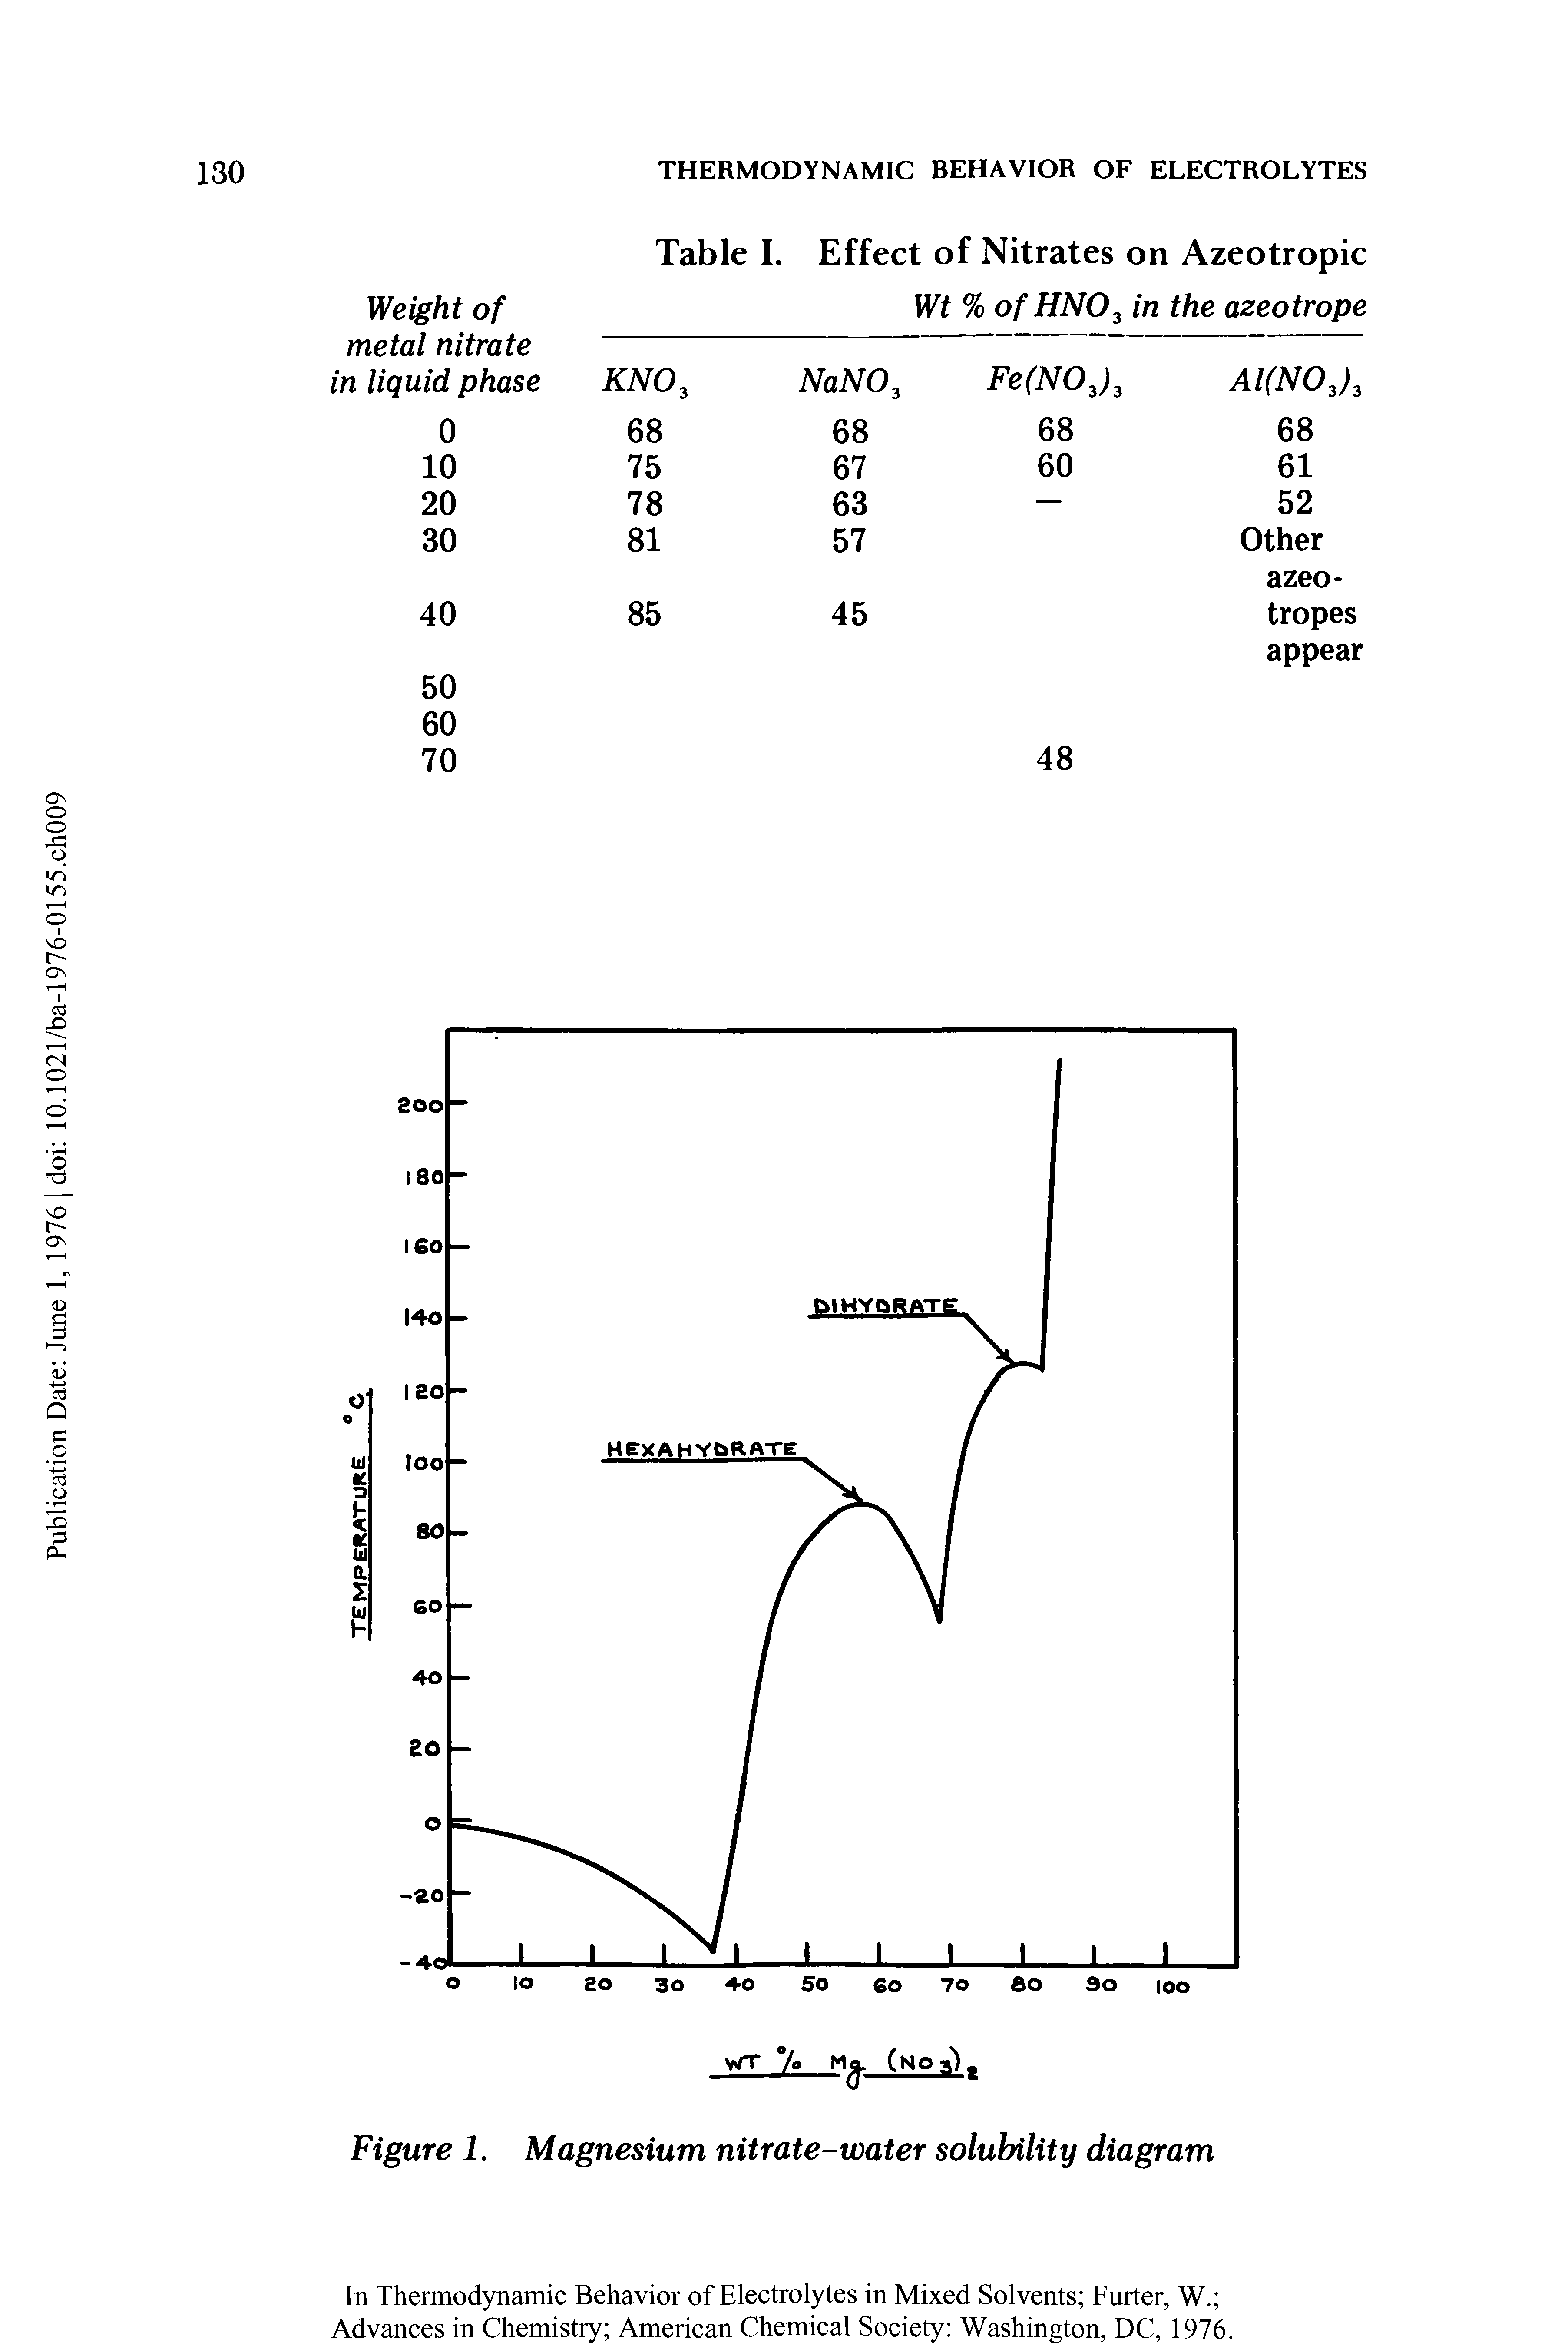 Figure 1. Magnesium nitrate-water solubility diagram...